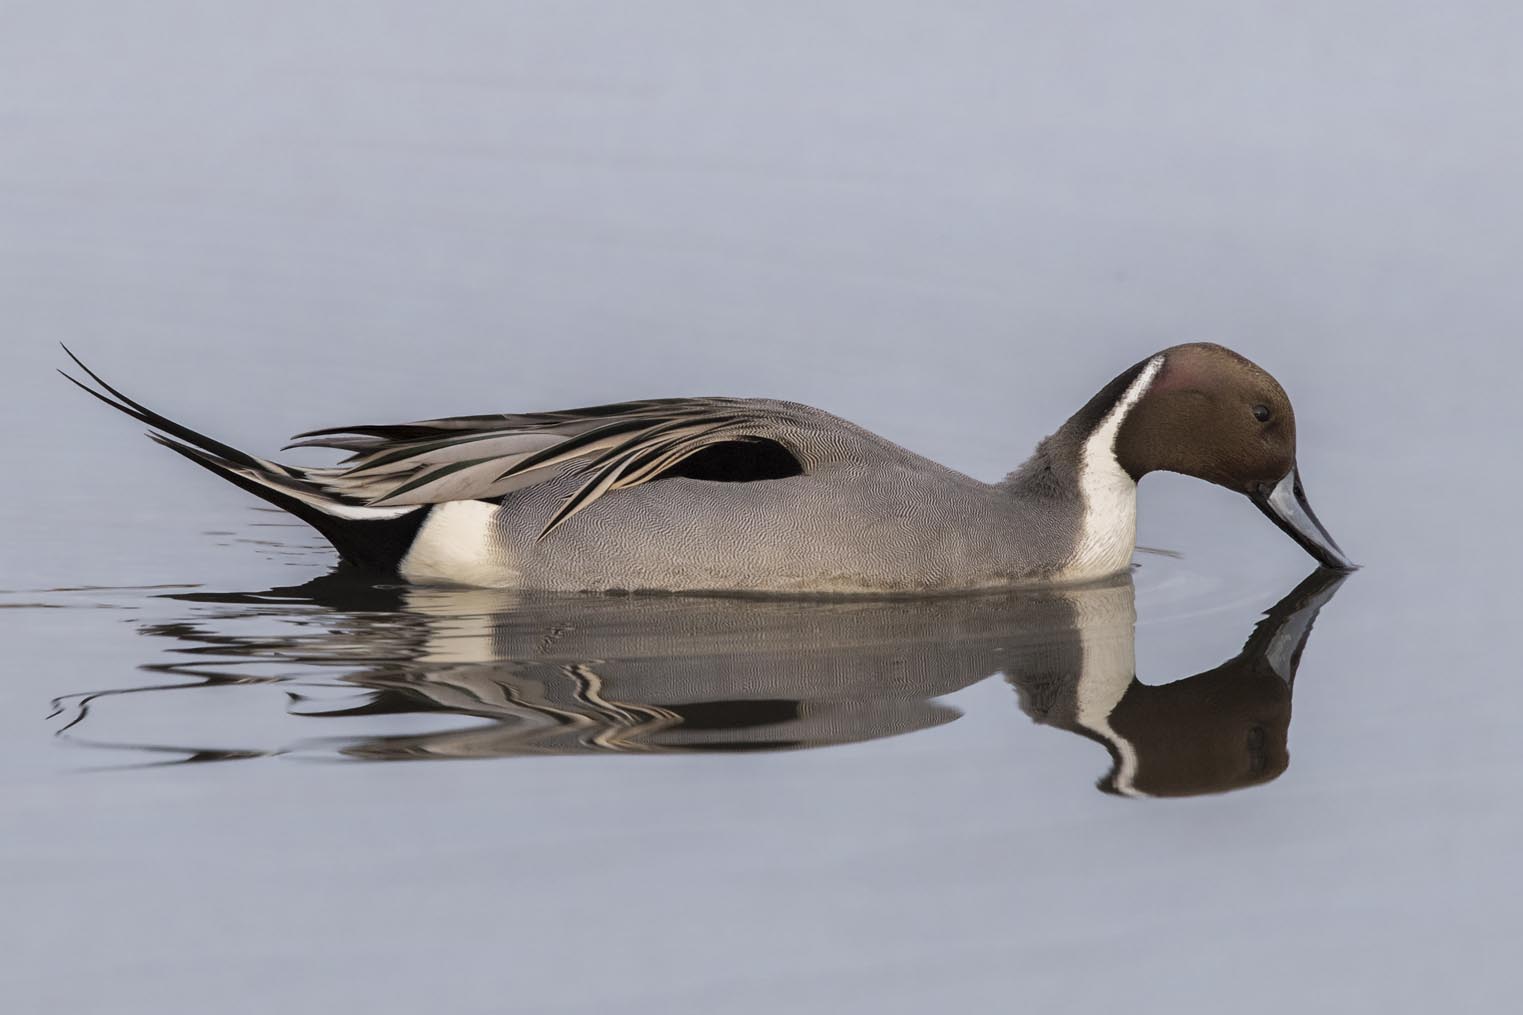 Northern Pintail m 3290s